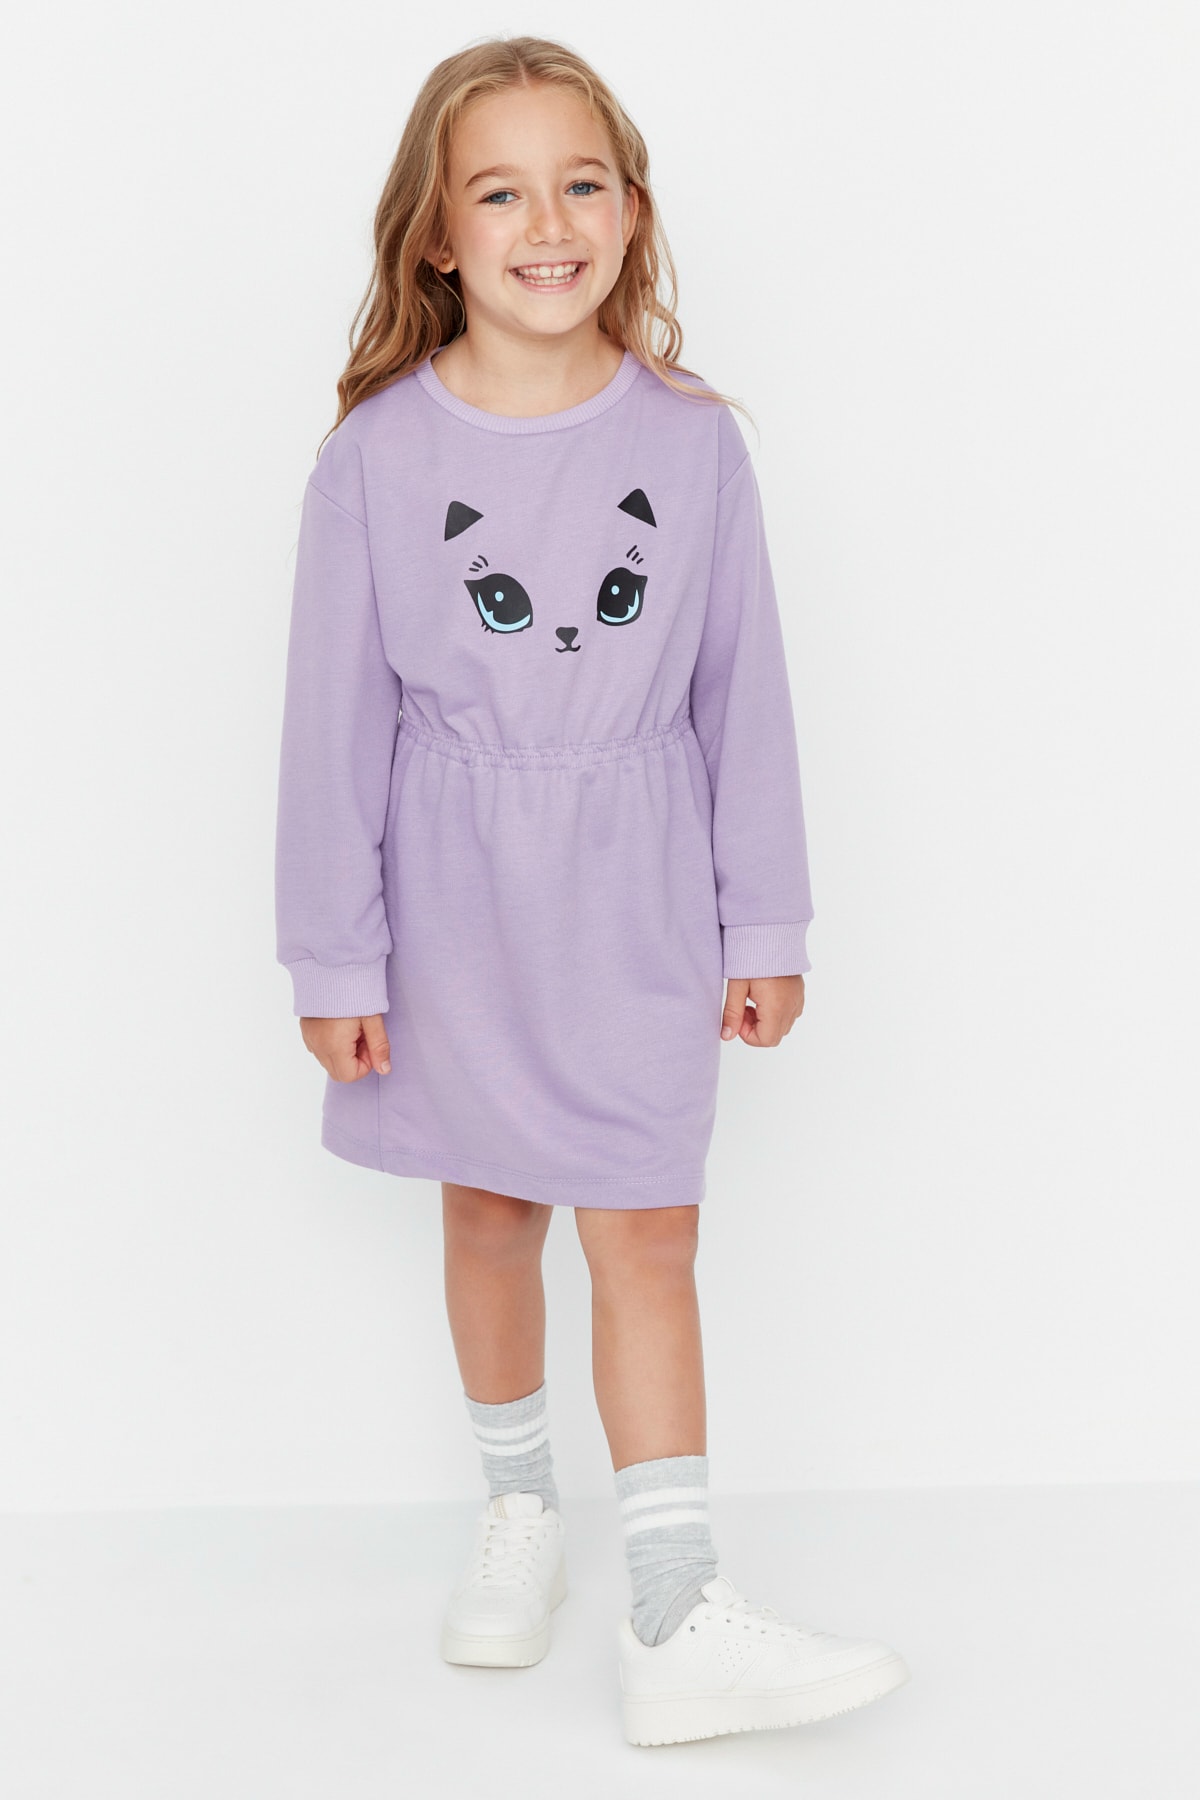 Trendyol Lilac Printed Girl's Knitted Dress